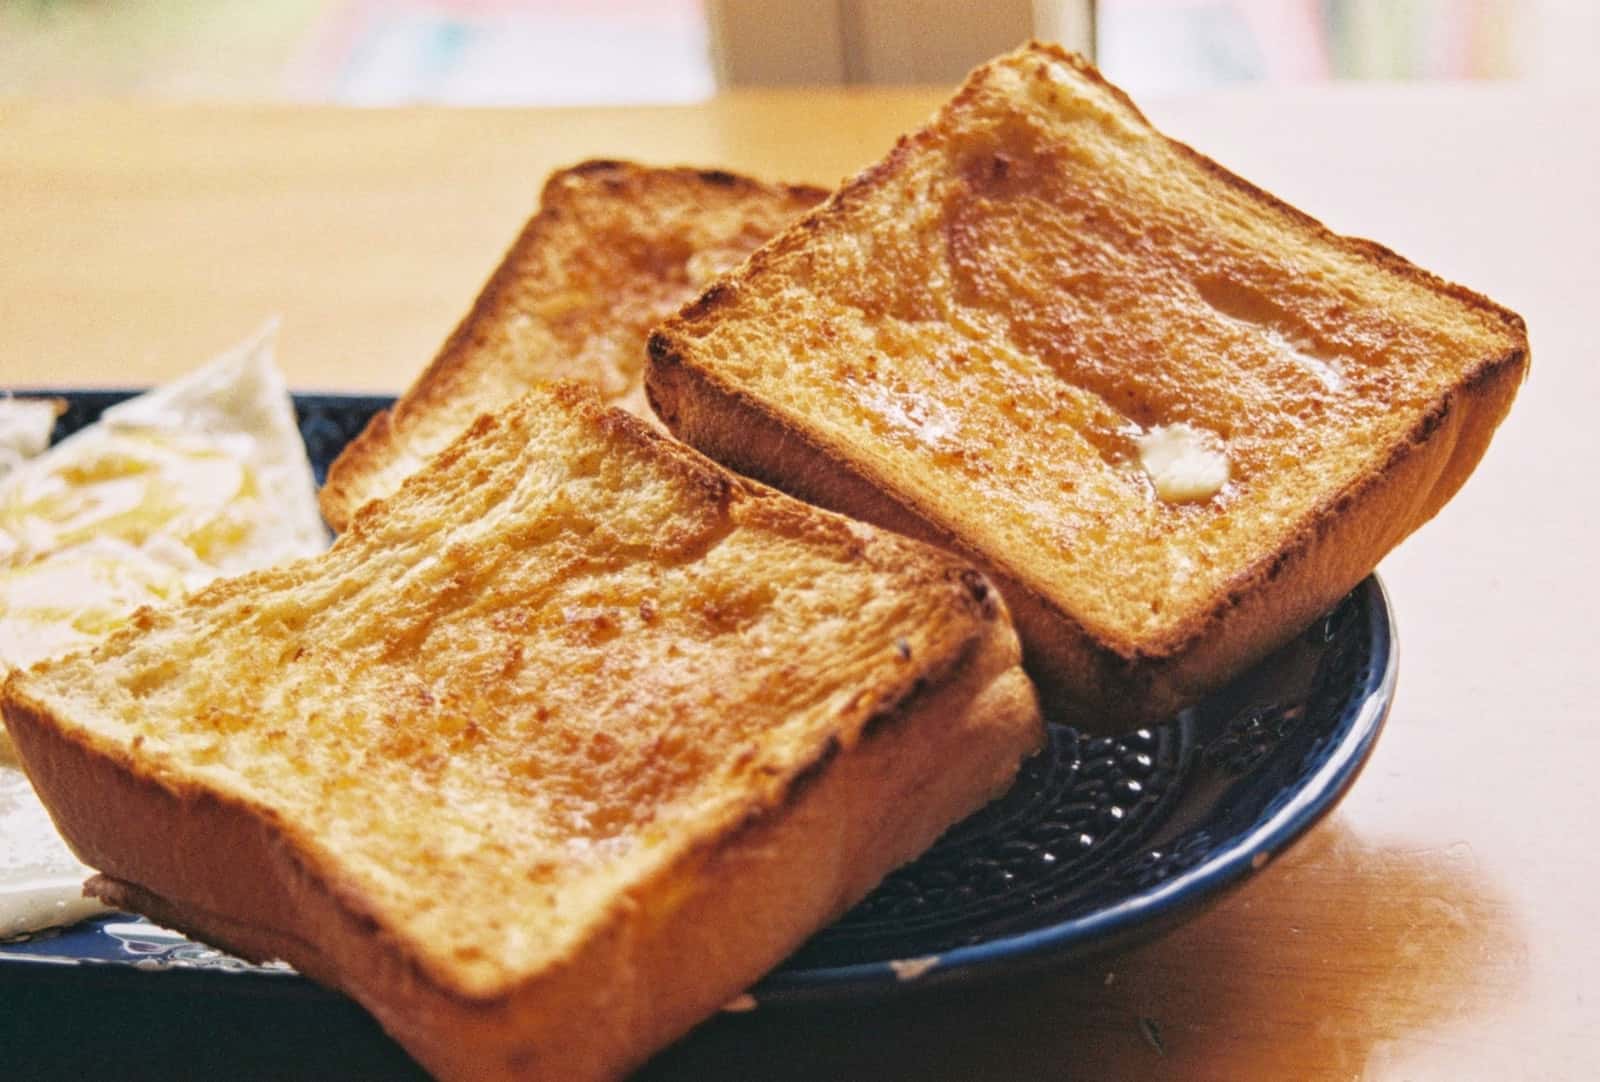 Buttered toasted white bread